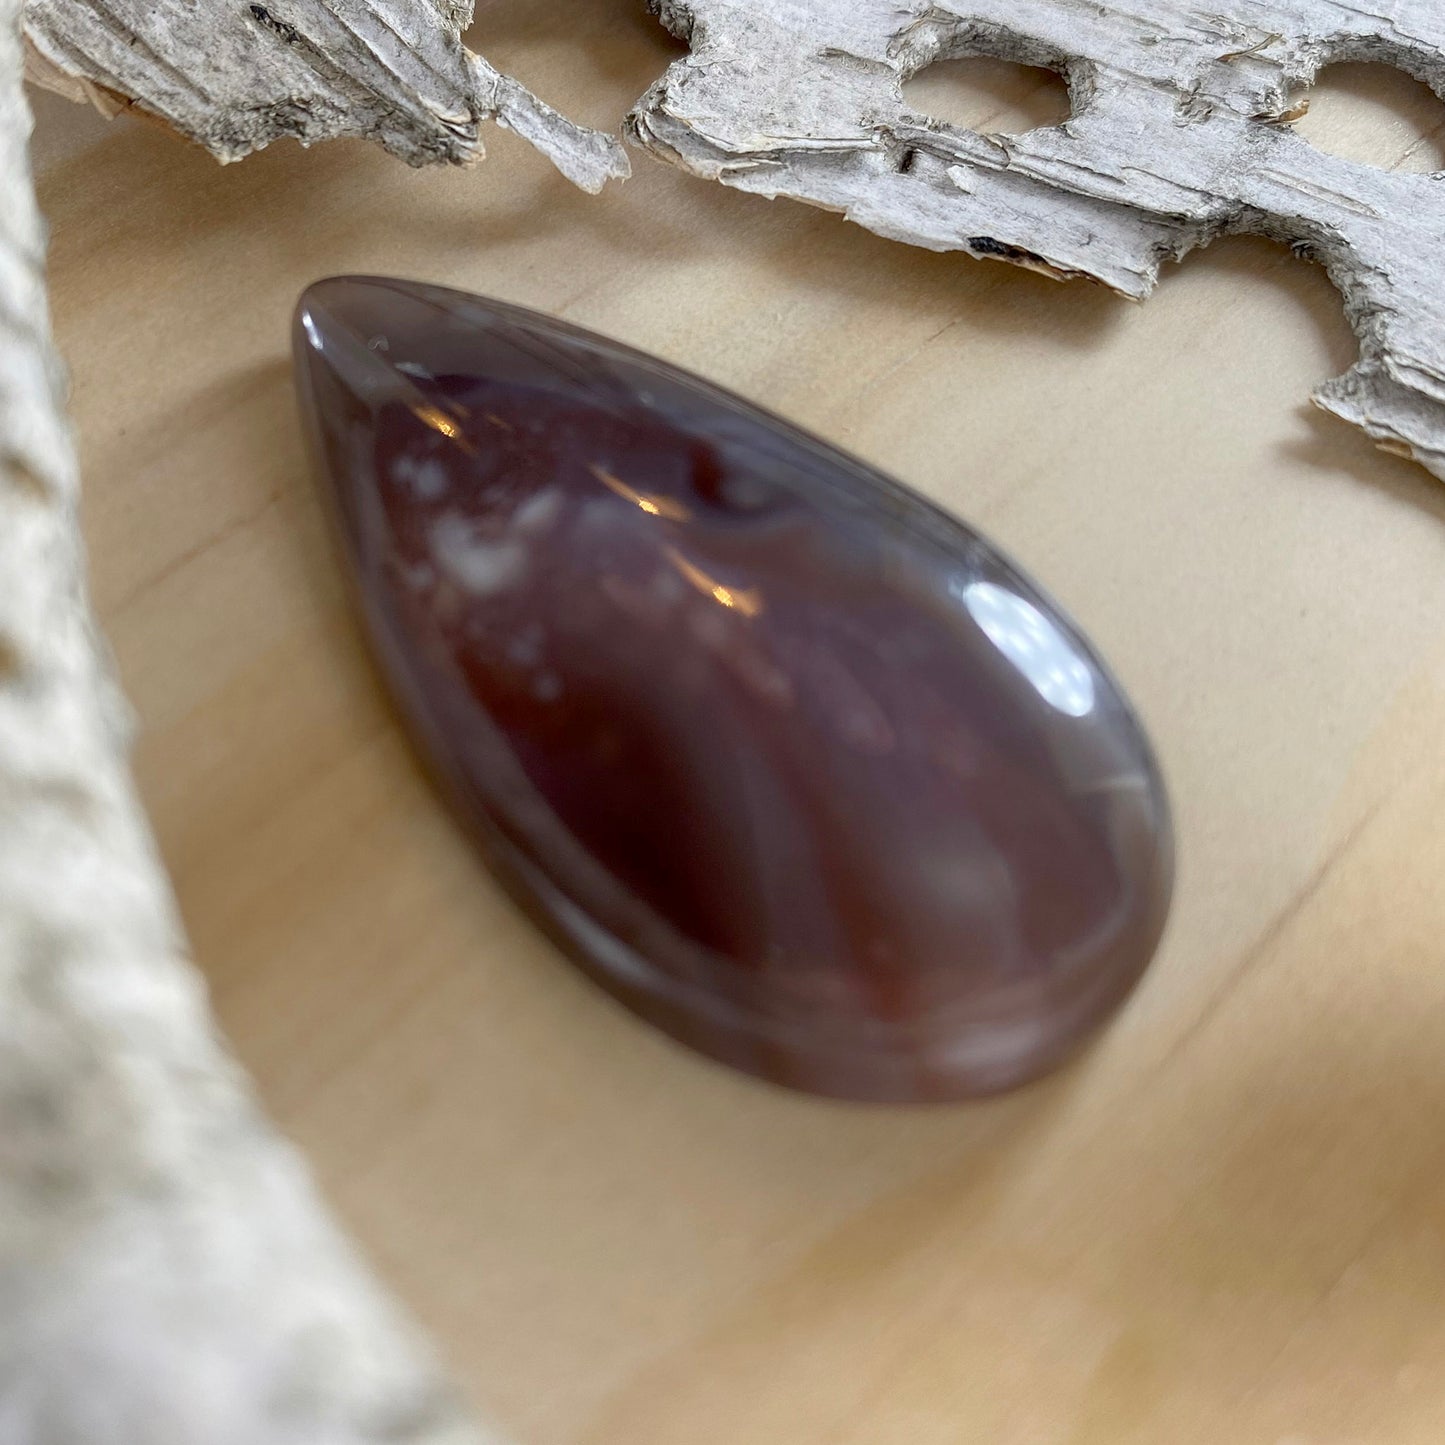 Botswana Agate Cabochon Front View - Stone Treasures by the Lake